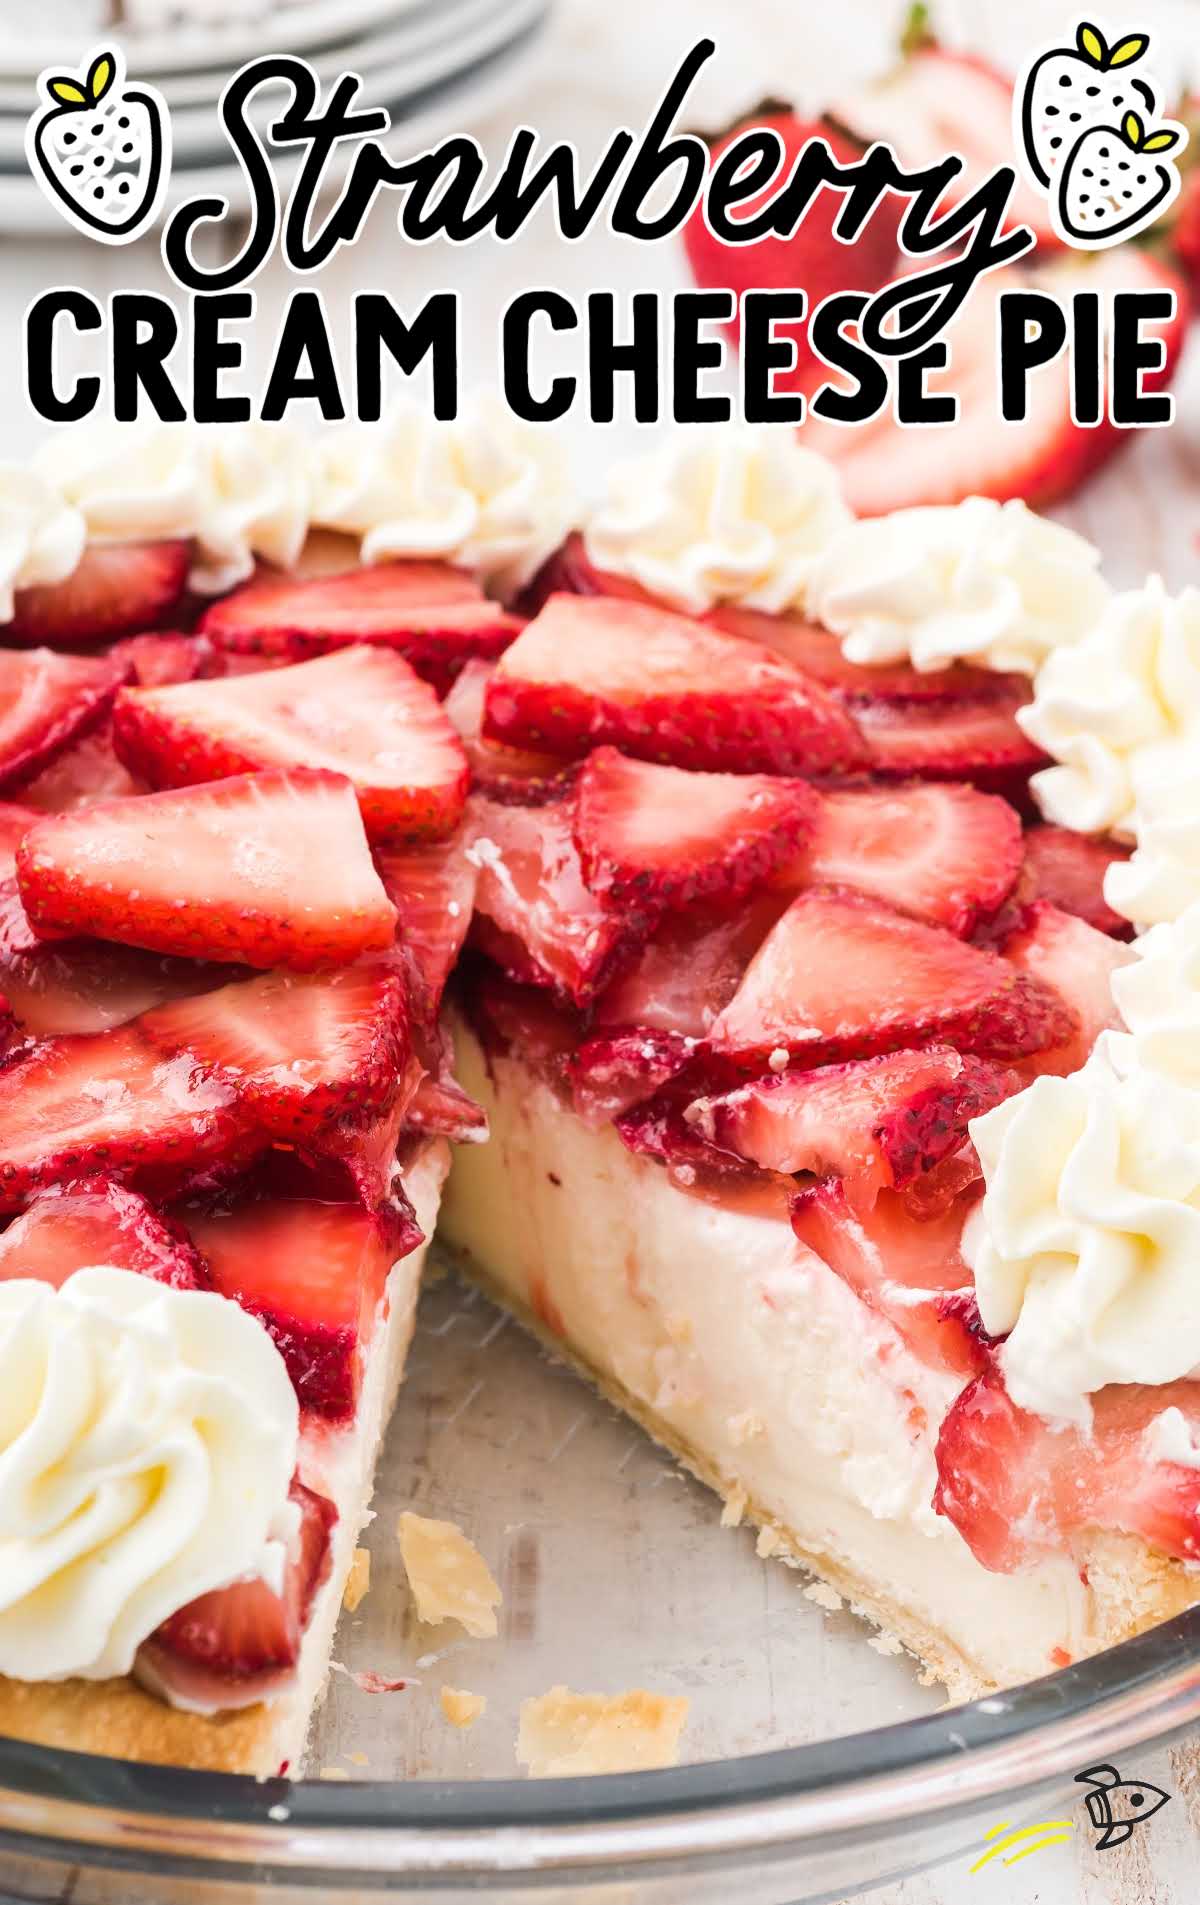 close up shot of strawberry cream cheese pie with sliced strawberries and a whipped topping in a clear pie dish